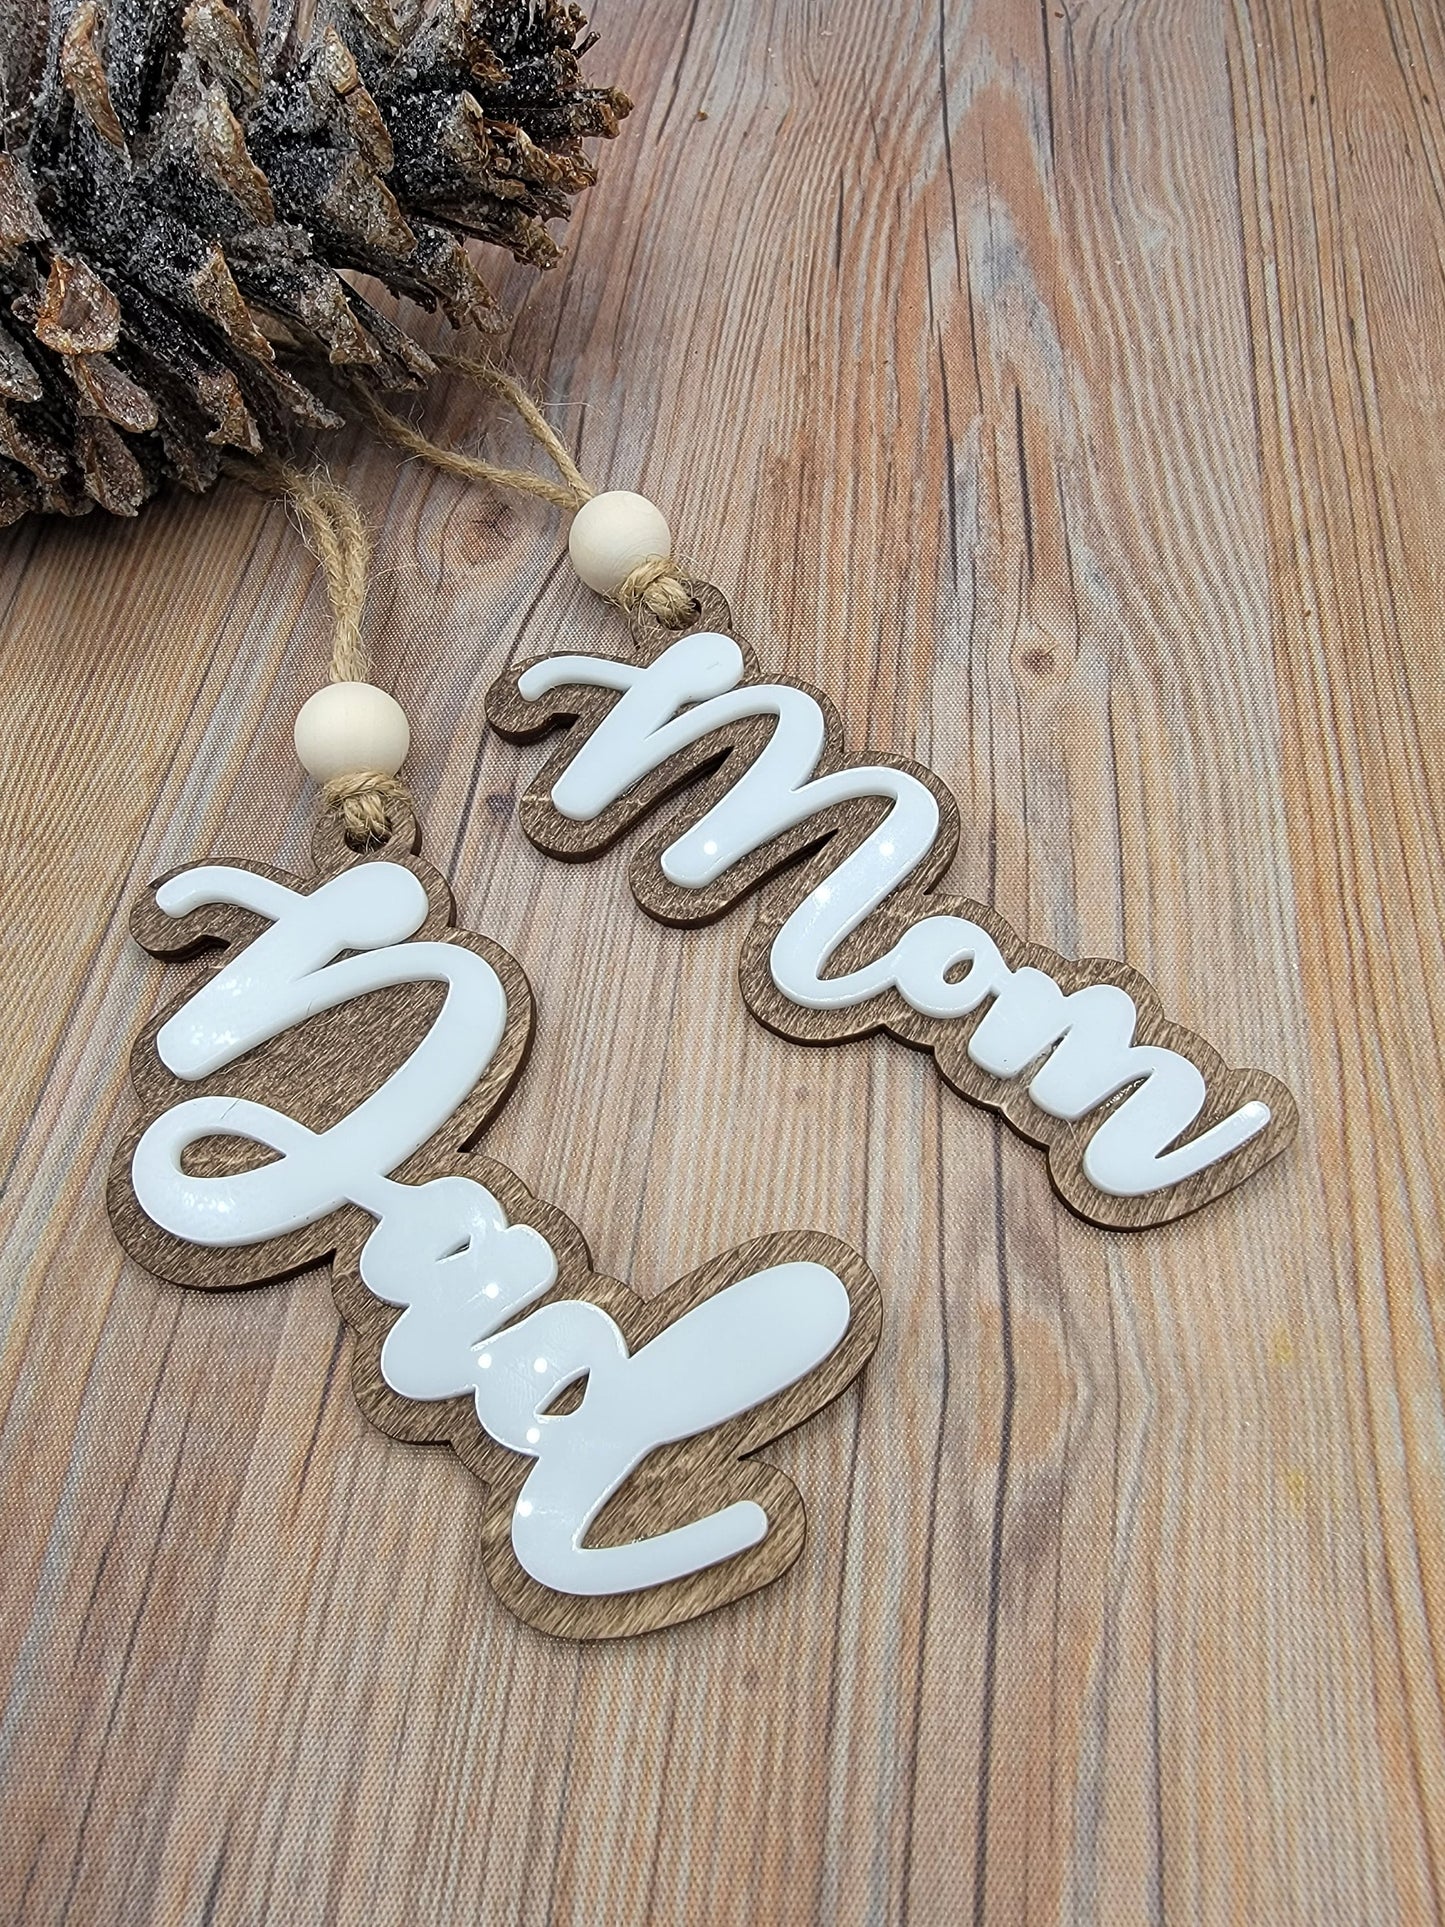 Personalized Stocking Tag Ornament,Personalized Christmas Stocking Tag- Family Names